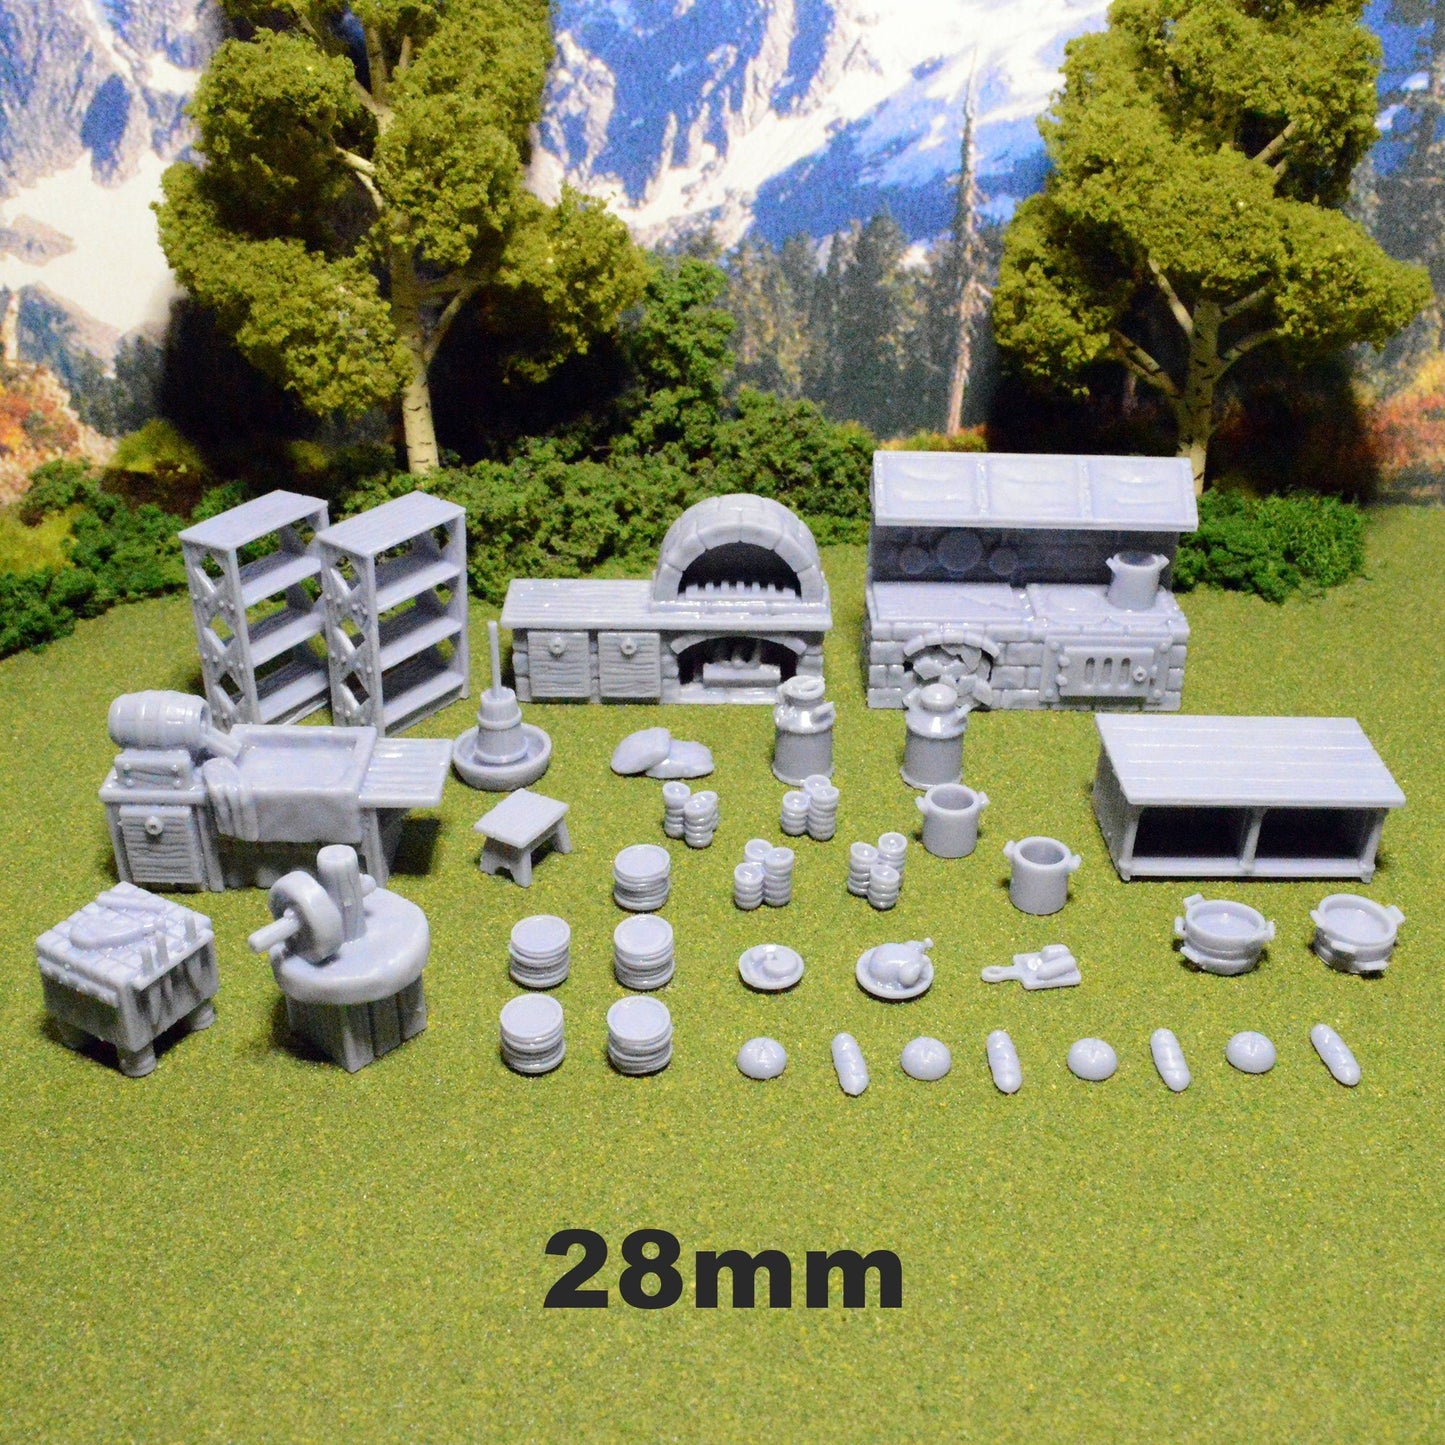 Miniature Kitchen Furniture and Food 28mm for D&D Terrain, DnD Pathfinder Diorama Tavern Inn Oven Stove Shelves Dishes